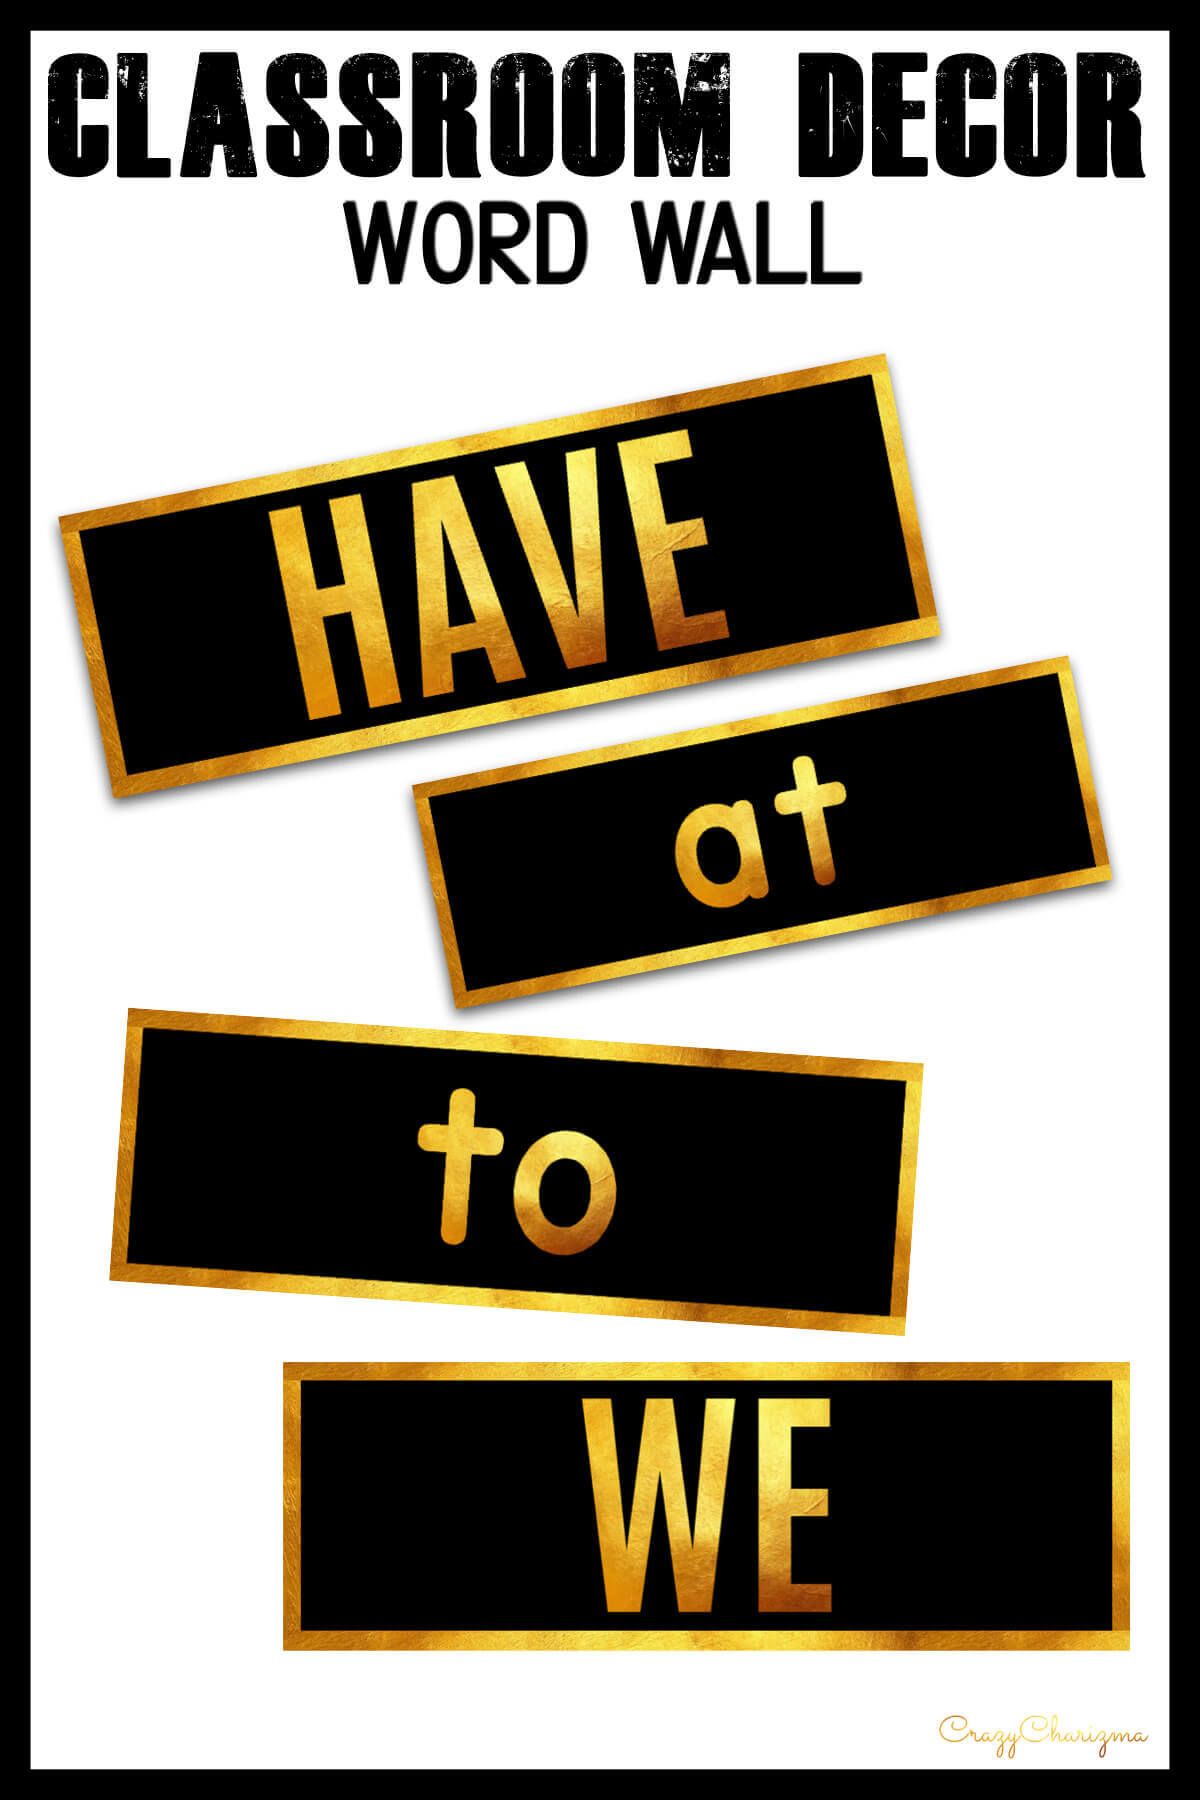 Looking for stylish decor? Love black and gold? This huge decor set is what you need and will love! There are over 200+ pages of printables. Find inside classroom jobs labels, name tags, alphabet posters, numbers posters, centers signs, table signs, hall passes, schedule, calendar elements.